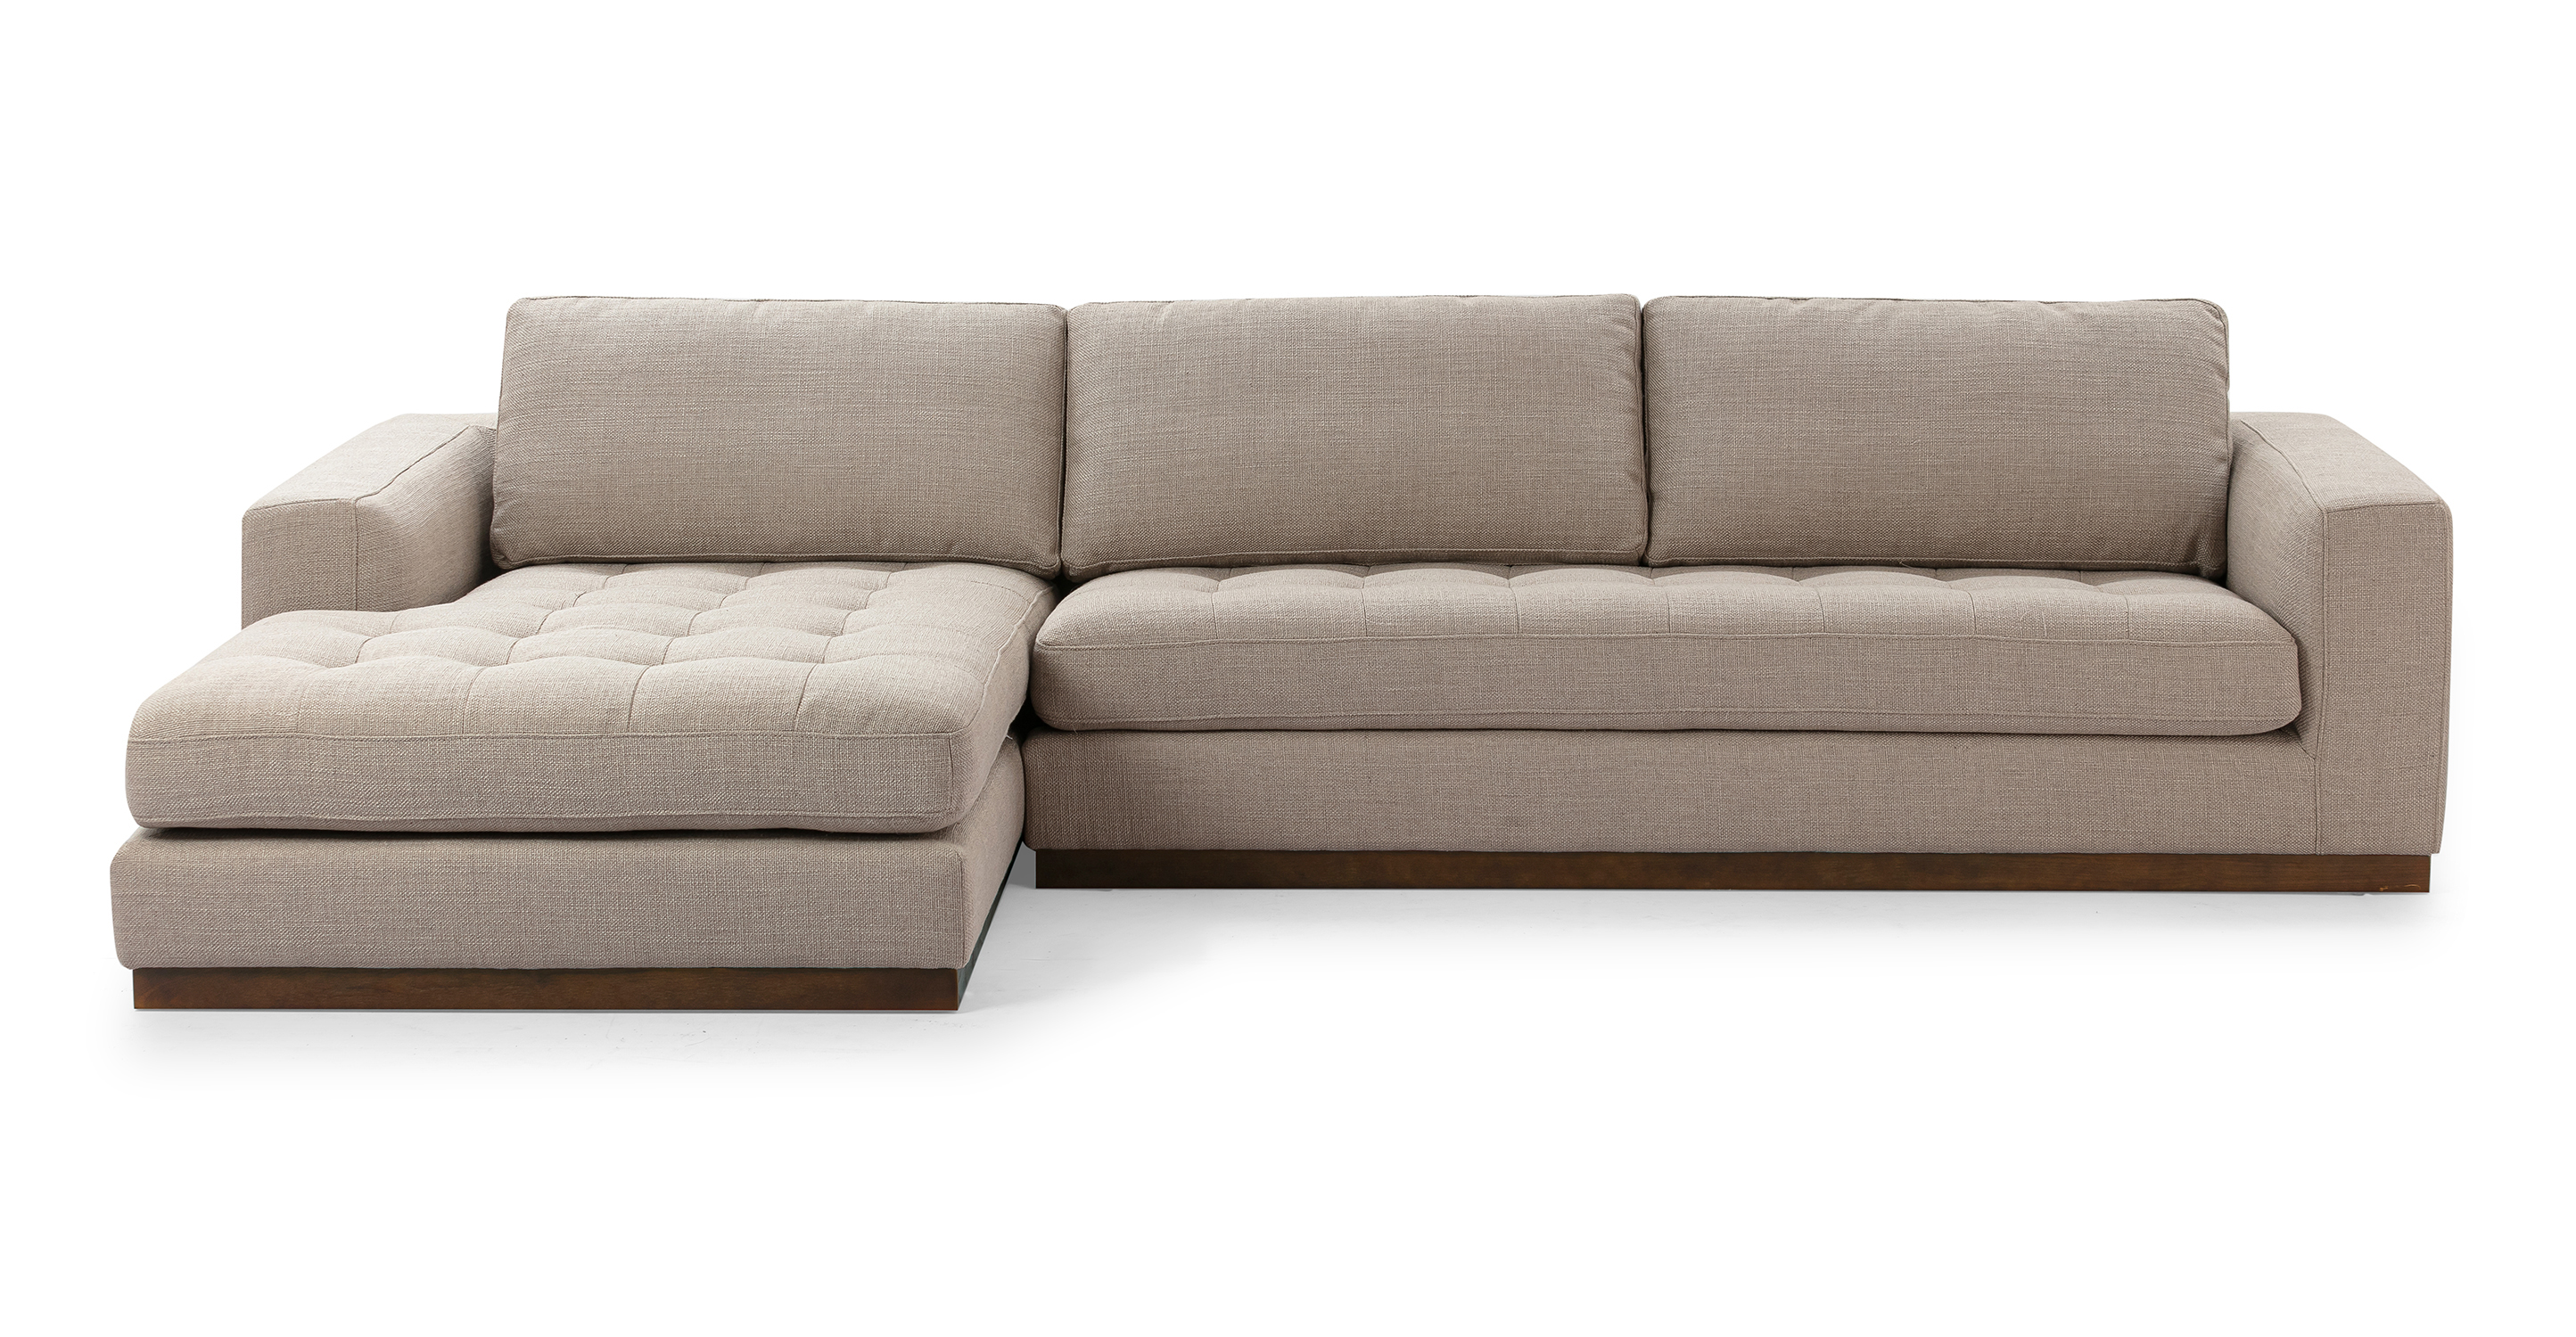 Newport floor sofa series in Dunes color offers a substantial and solid feel. The base of the sofa series is crafted from walnut wood, providing a sturdy and stylish foundation. The modular design allows for flexibility in configuring the components to suit your preferences and space.
Each component of the series features an upholstered base that is attached to the wooden frame, combining both comfort and durability. The seat and back cushions are removable, allowing for easy customization and cleaning.
The arms of the sofa pieces are rectangular, providing a clean and contemporary aesthetic.
In the Newport 4 sectional, one single arm sofa connects to a one arm chaise to provide a sofa sectional experience.